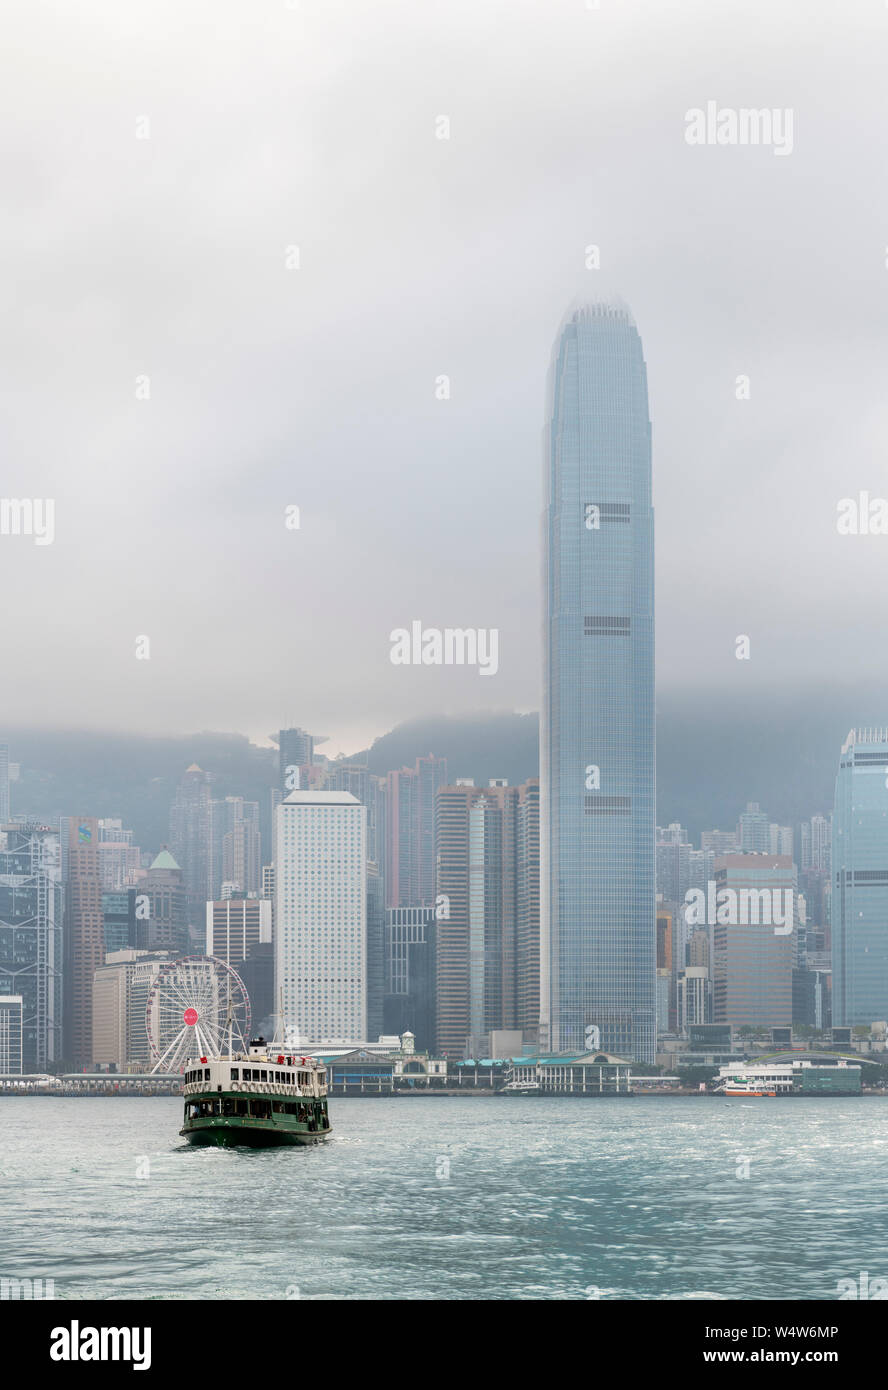 Star Ferry in Hong Kong Harbour with Two International Finance Centre and Central skyline behind, Hong Kong Island, Tsim Sha Tsui, Hong Kong, China Stock Photo